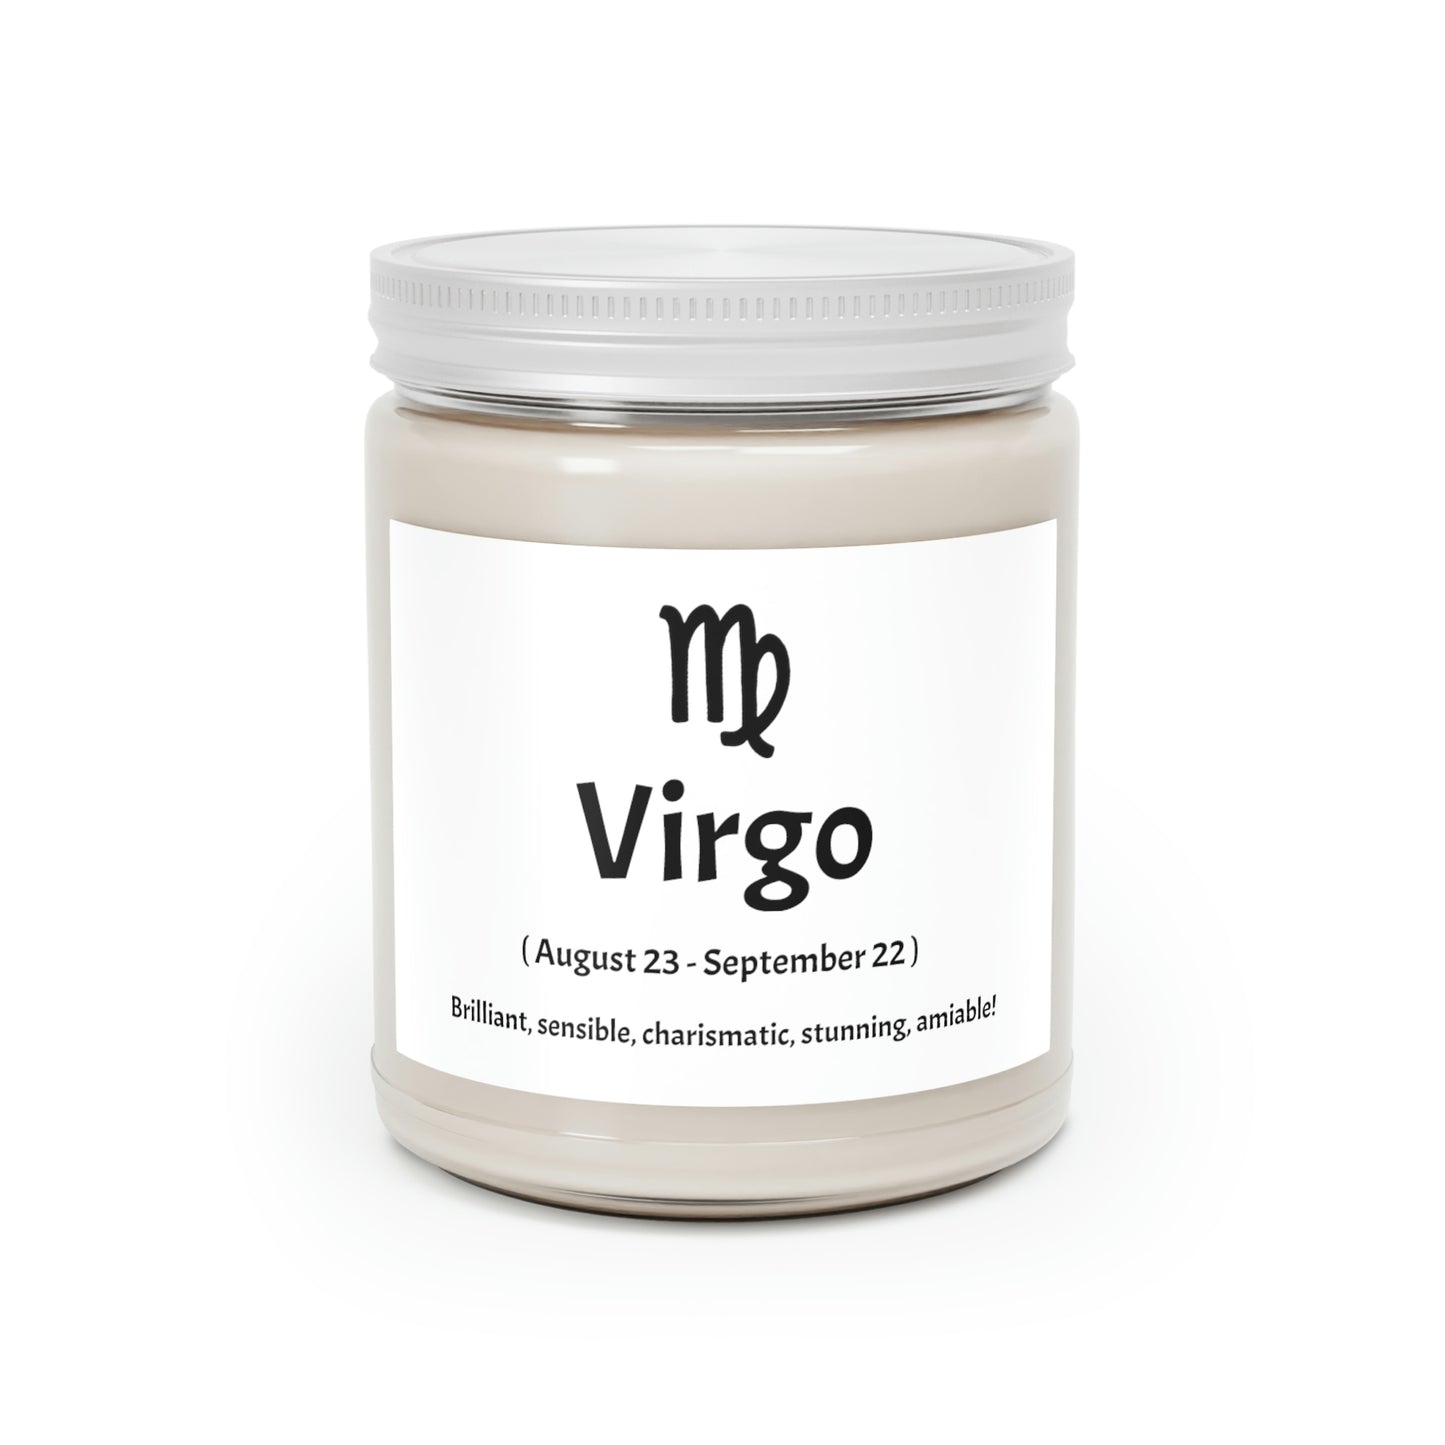 Virgo Scented Candle